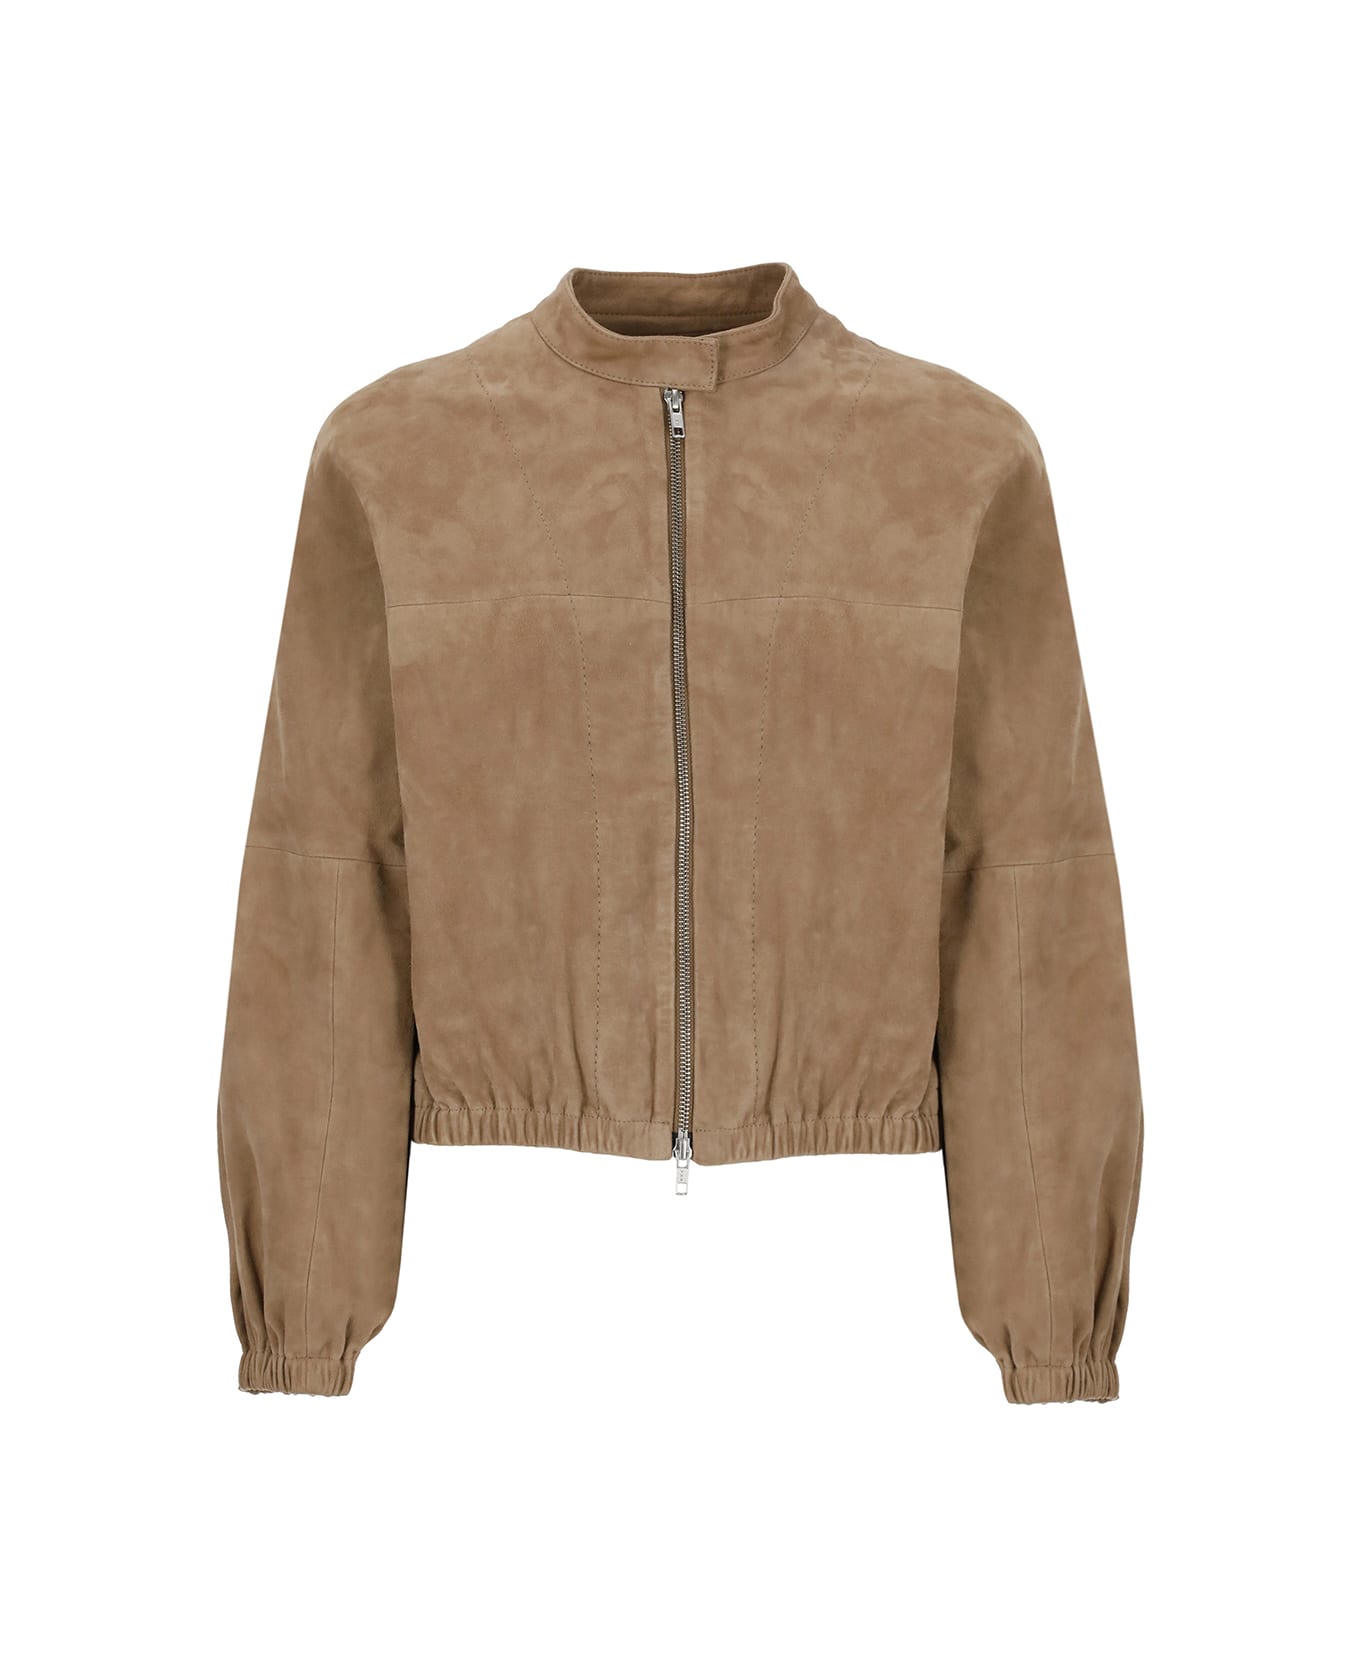 Bully Suede Leather Bomber Jacket - Brown ジャケット